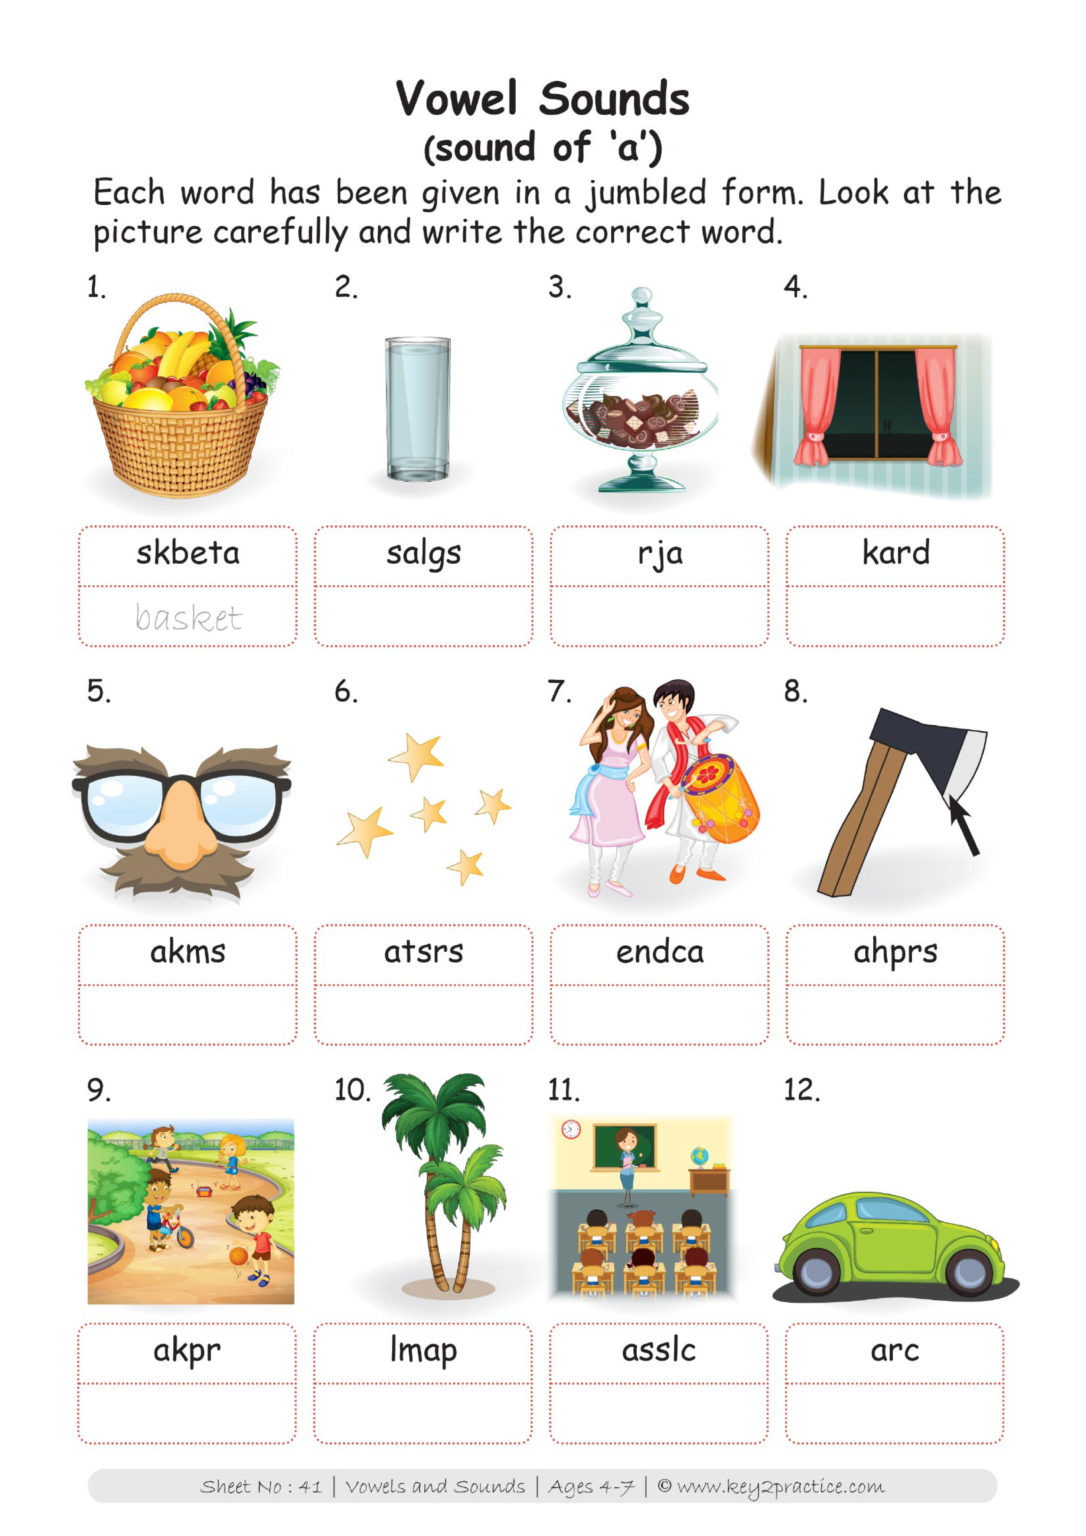 Vowels and Consonants Worksheets I Pre-primary classes - key2practice